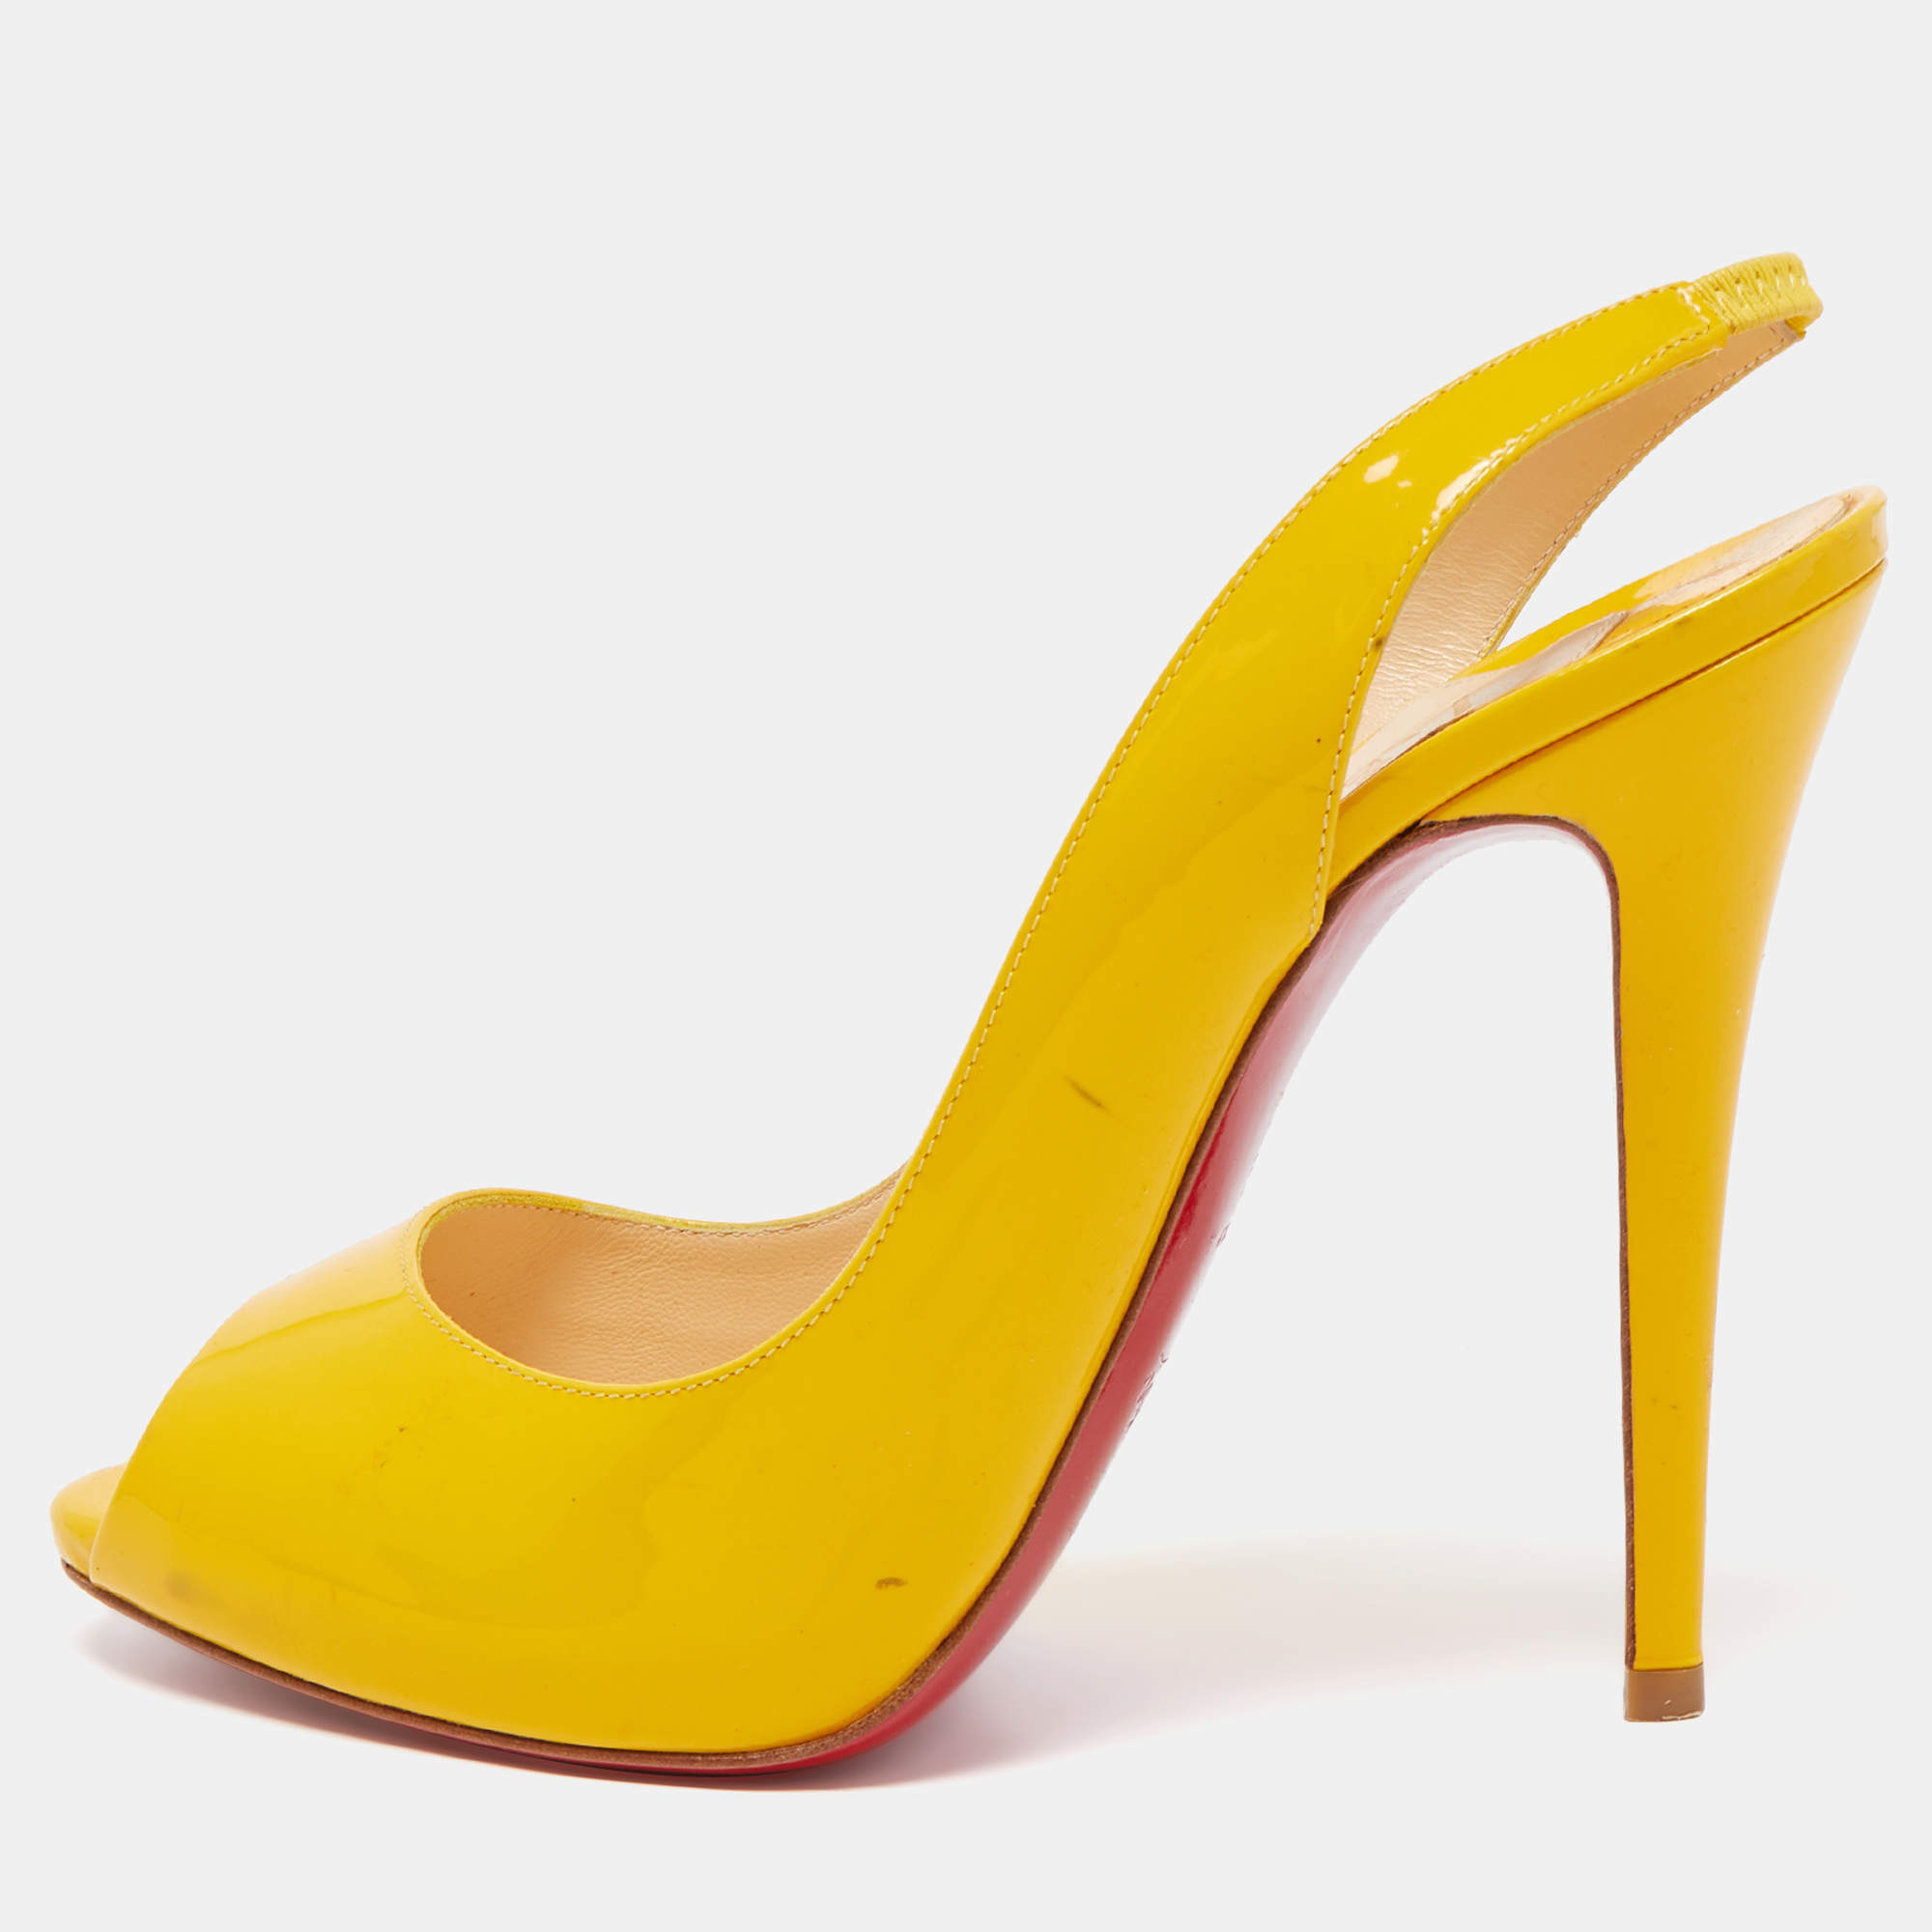 Buy Style Sting Women PF2367 Yellow High Heels- 7 at Amazon.in